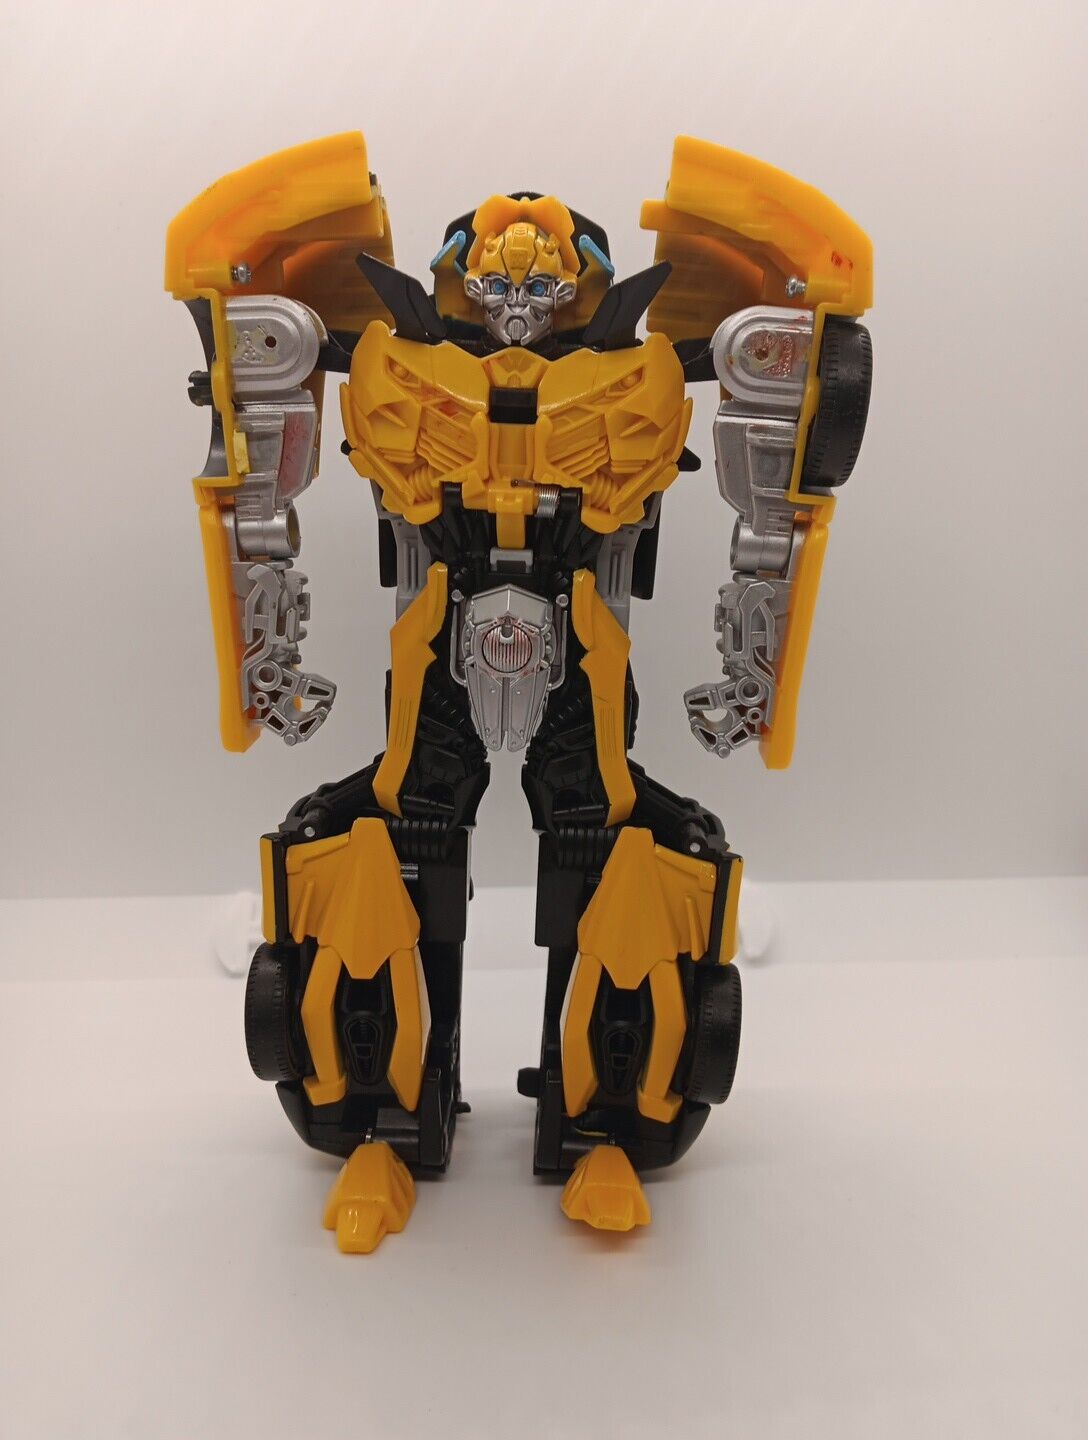  Transformers Last Knight Armor C1319 Turbo Changer Bumblebee From Hasbro